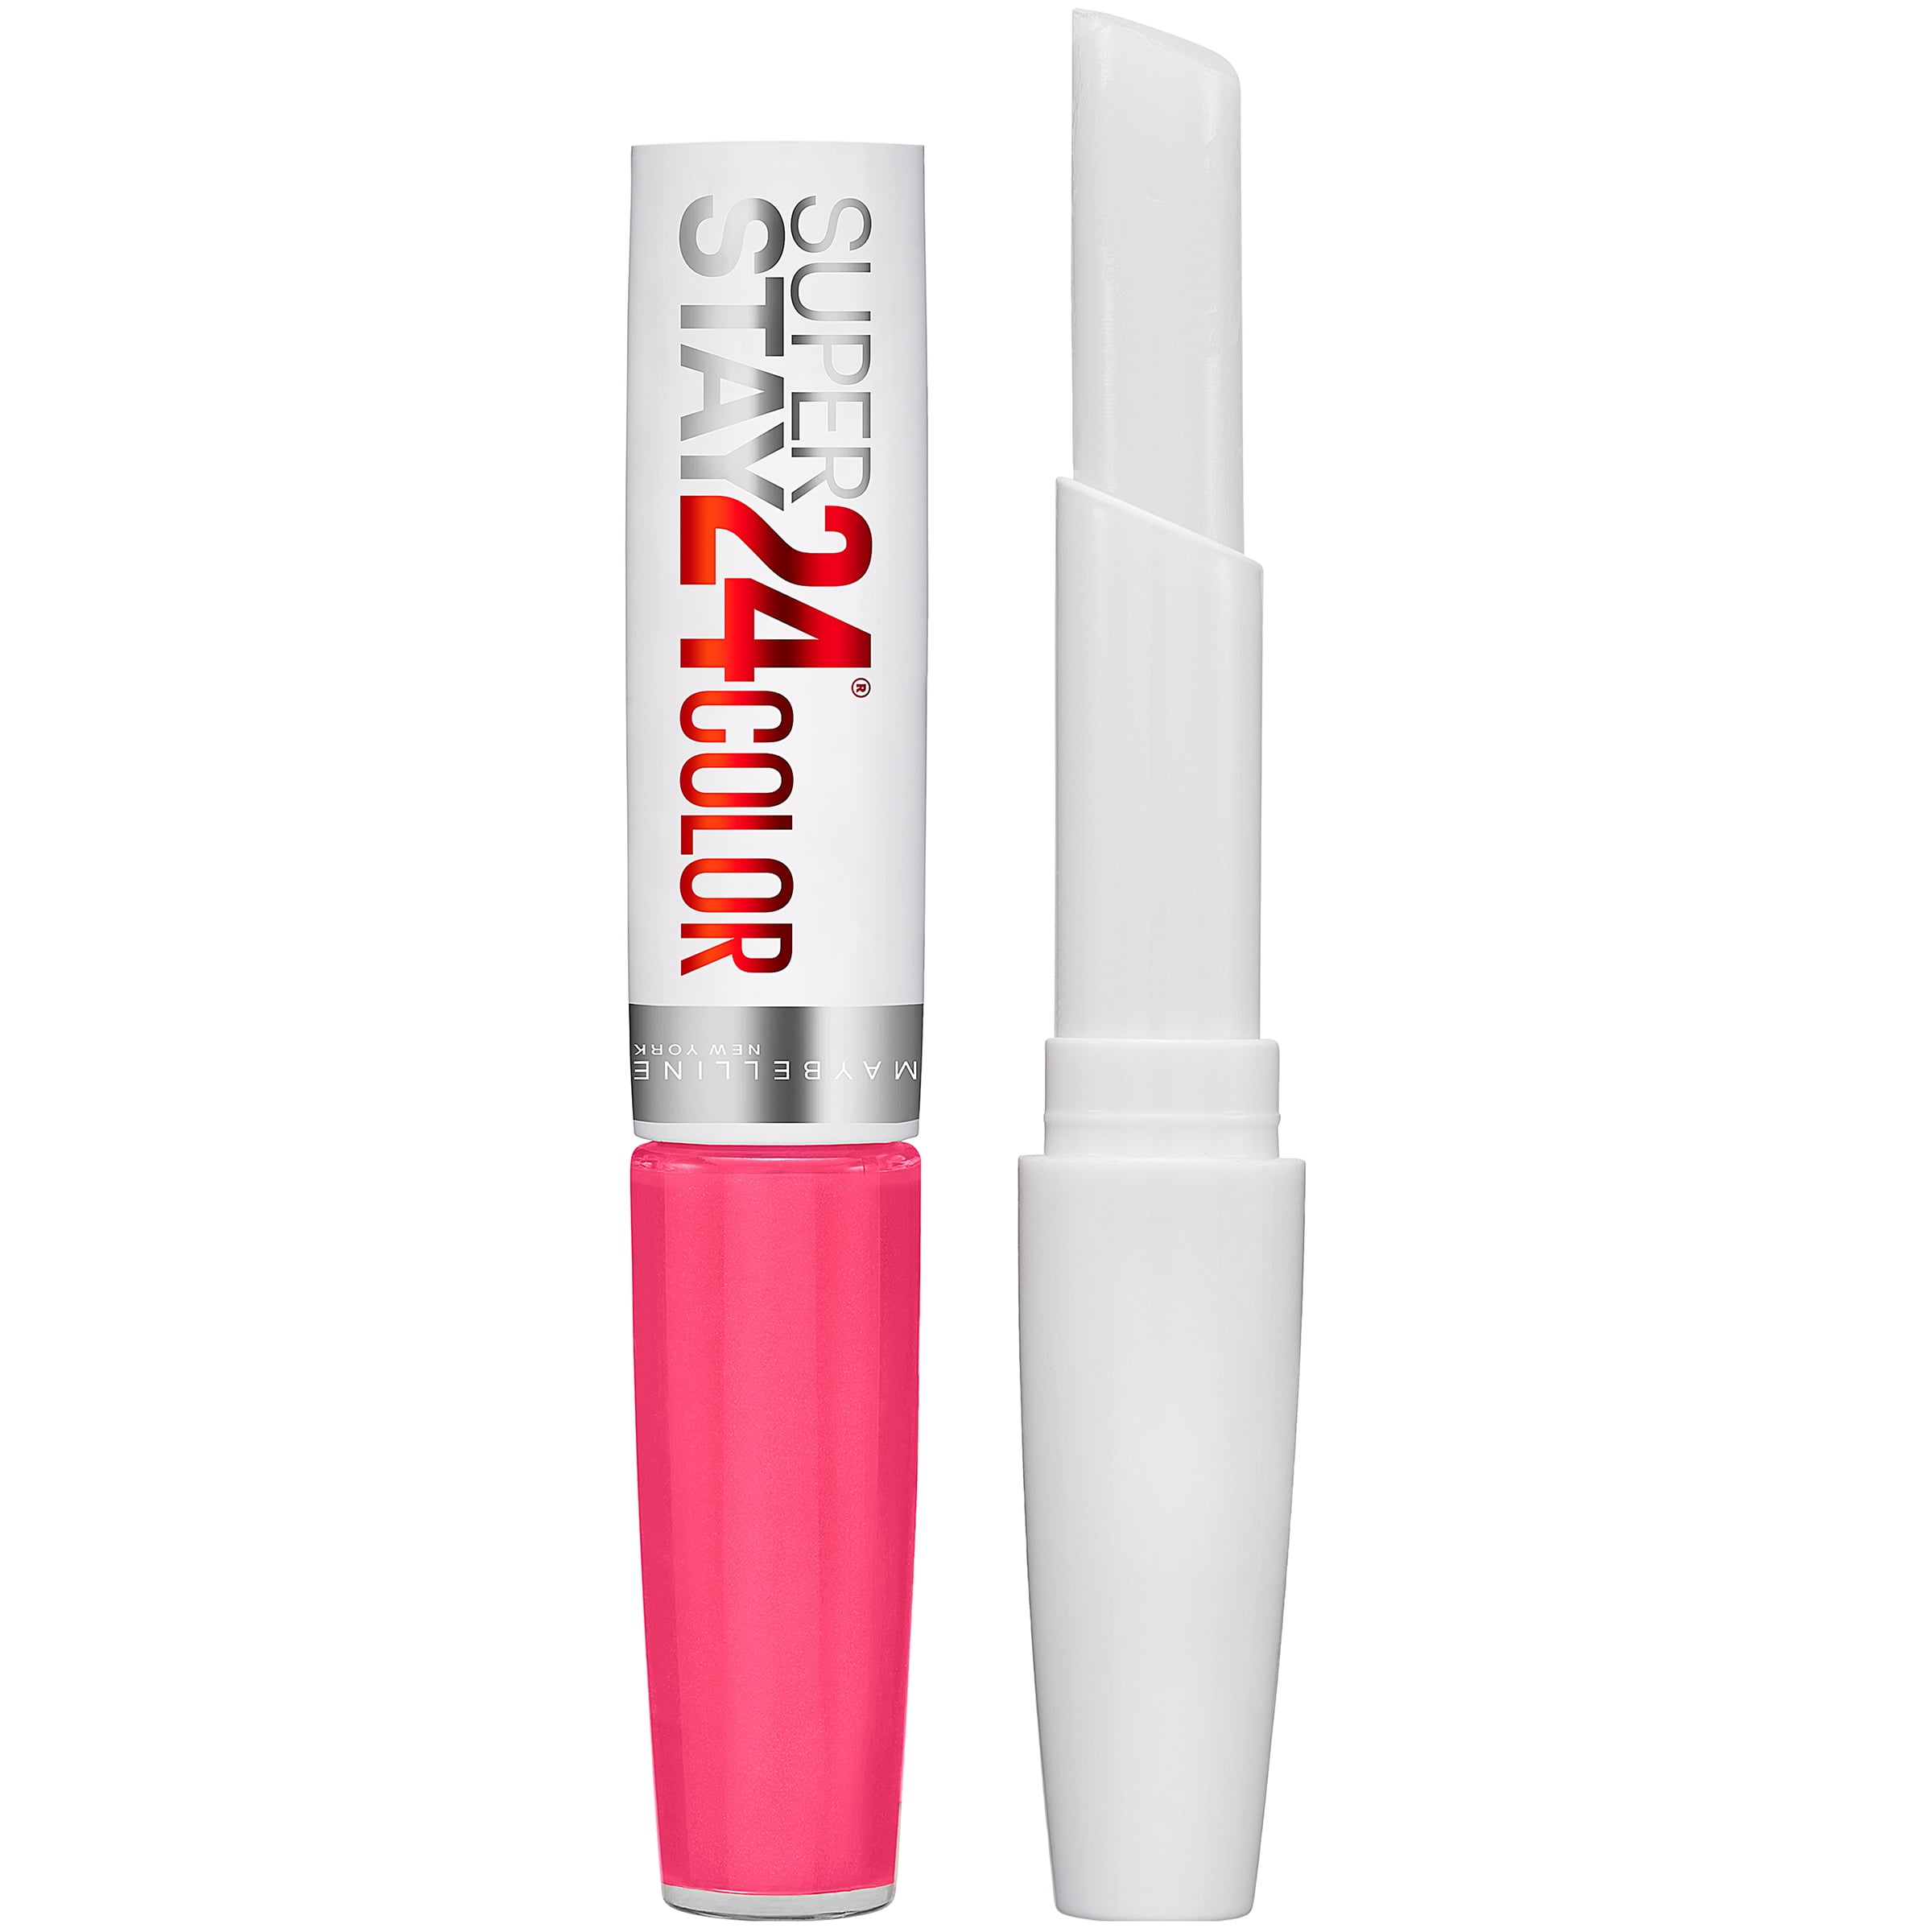 Liquid Maybelline Lipstick, On Pink 2-Step 24 Goes SuperStay